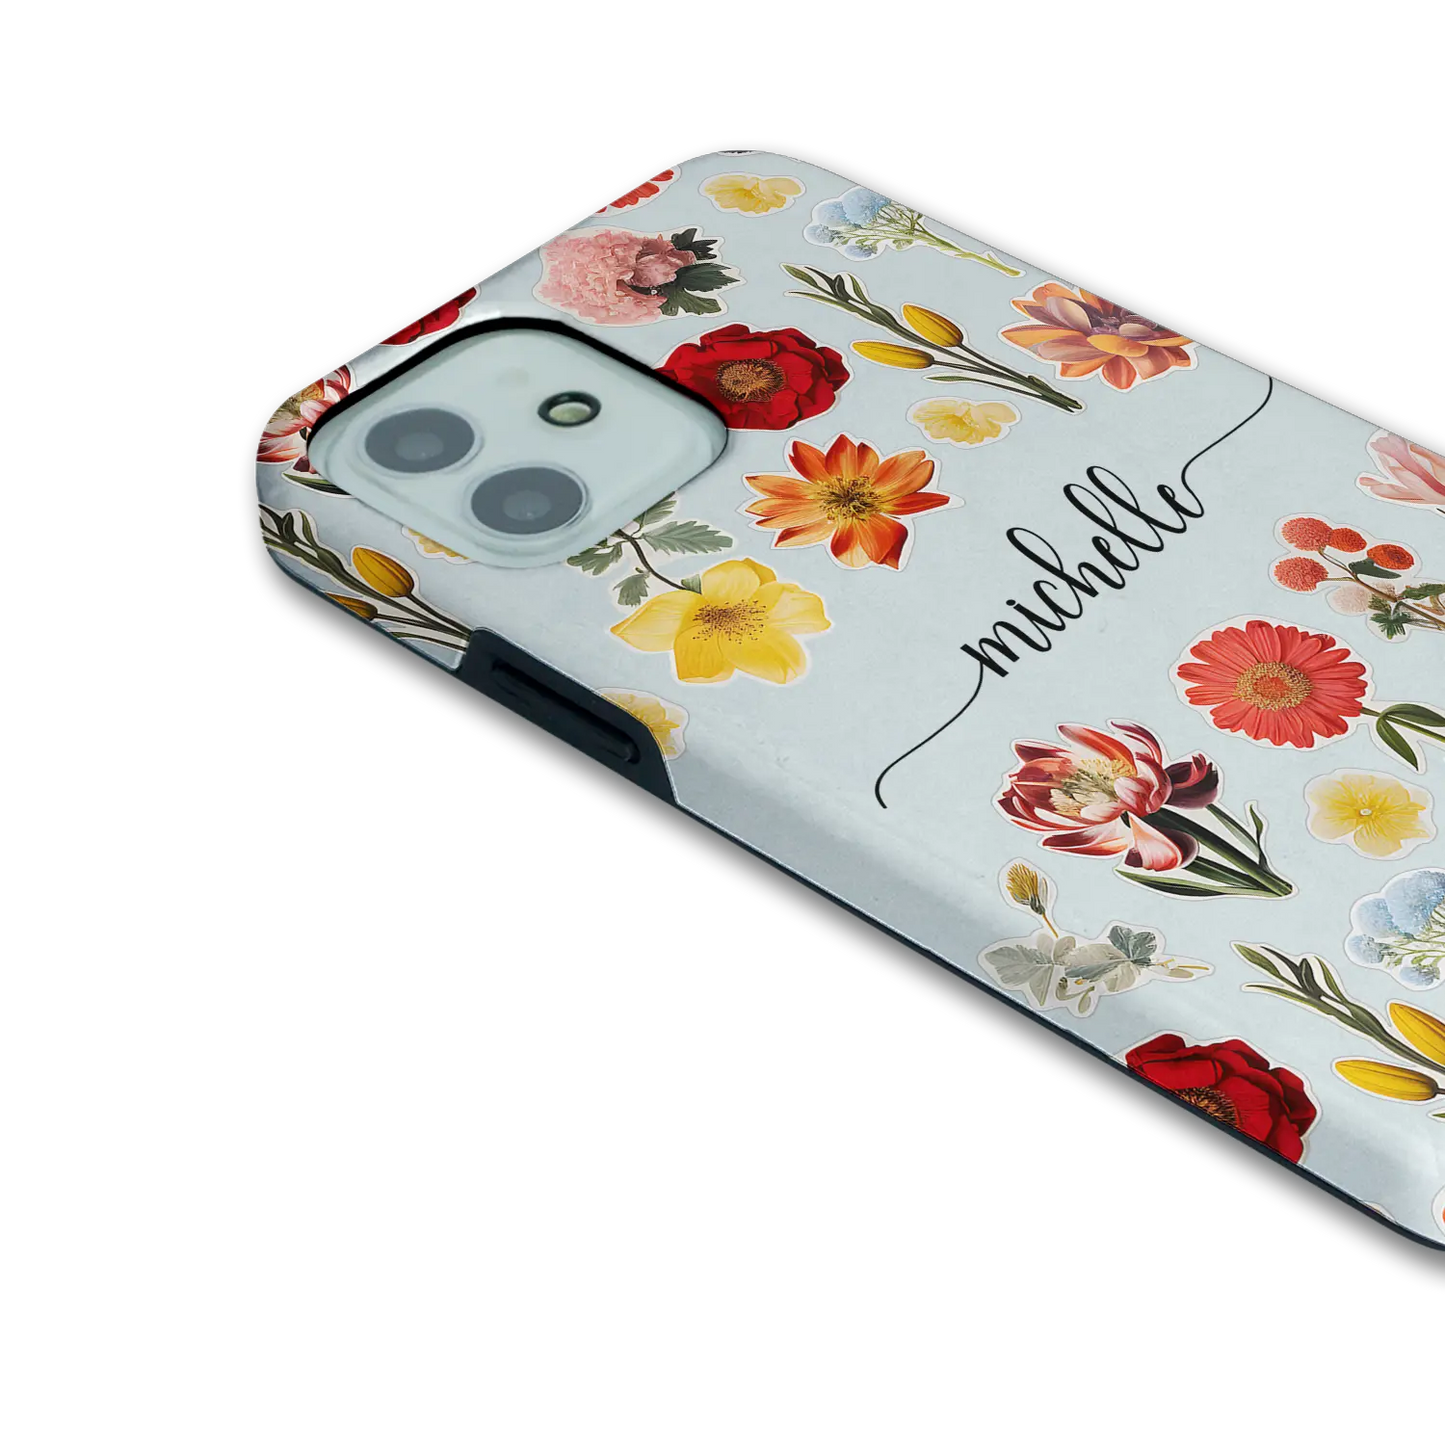 Flower Stickers - Personalised Galaxy S Case